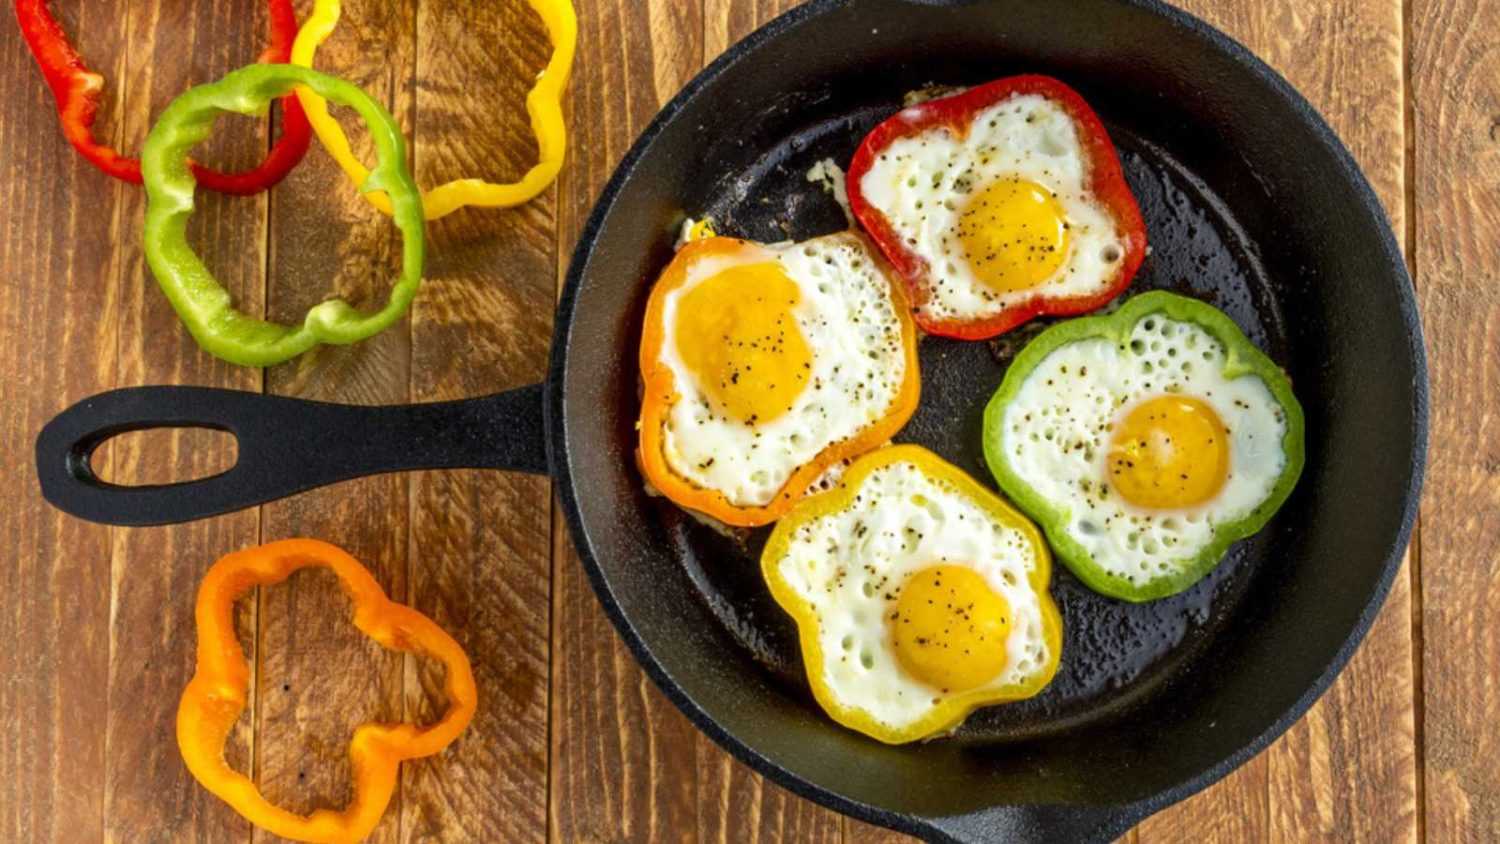 Large cast iron skillet with fried eggs in green, yellow, red and orange bell peppers sitting on wooden table with pepper slices